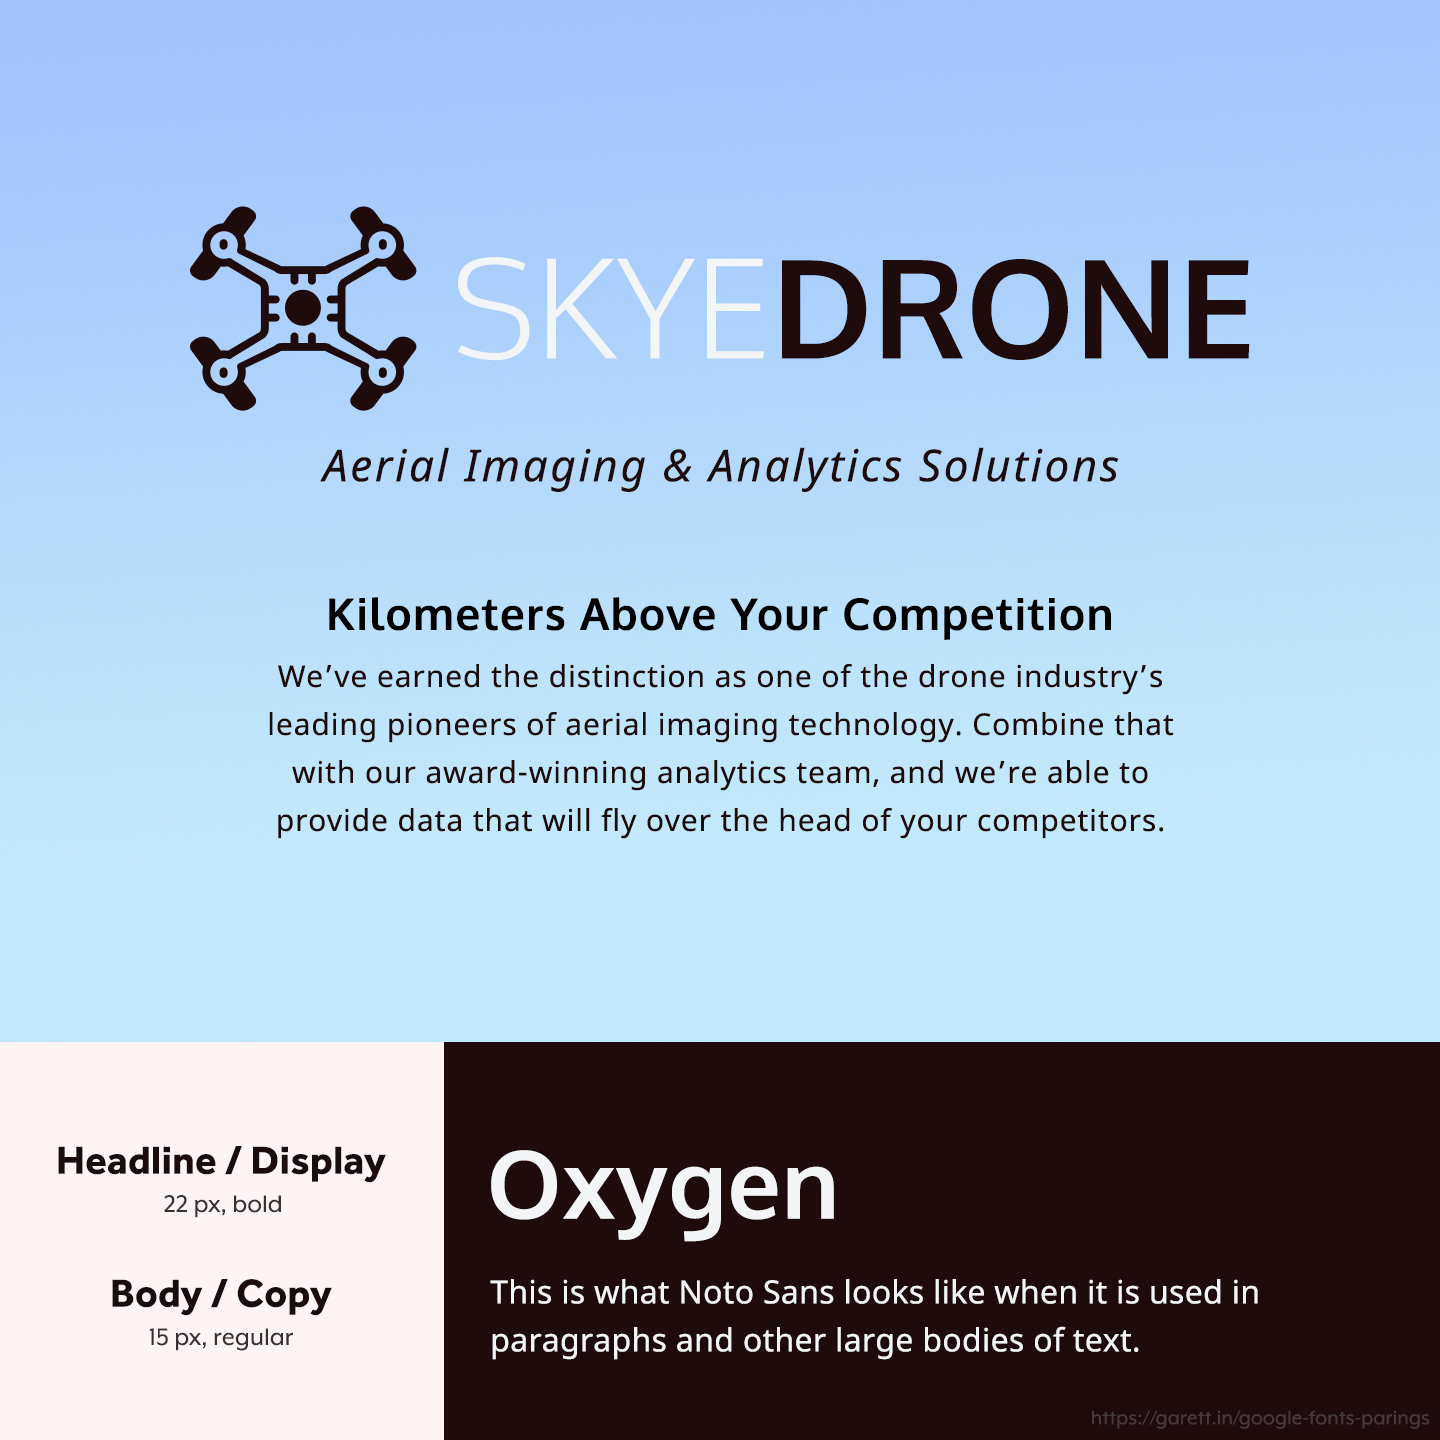 Oxygen and Noto Sans font pairing - 30 Google Font Pairings for Your Brand and Website